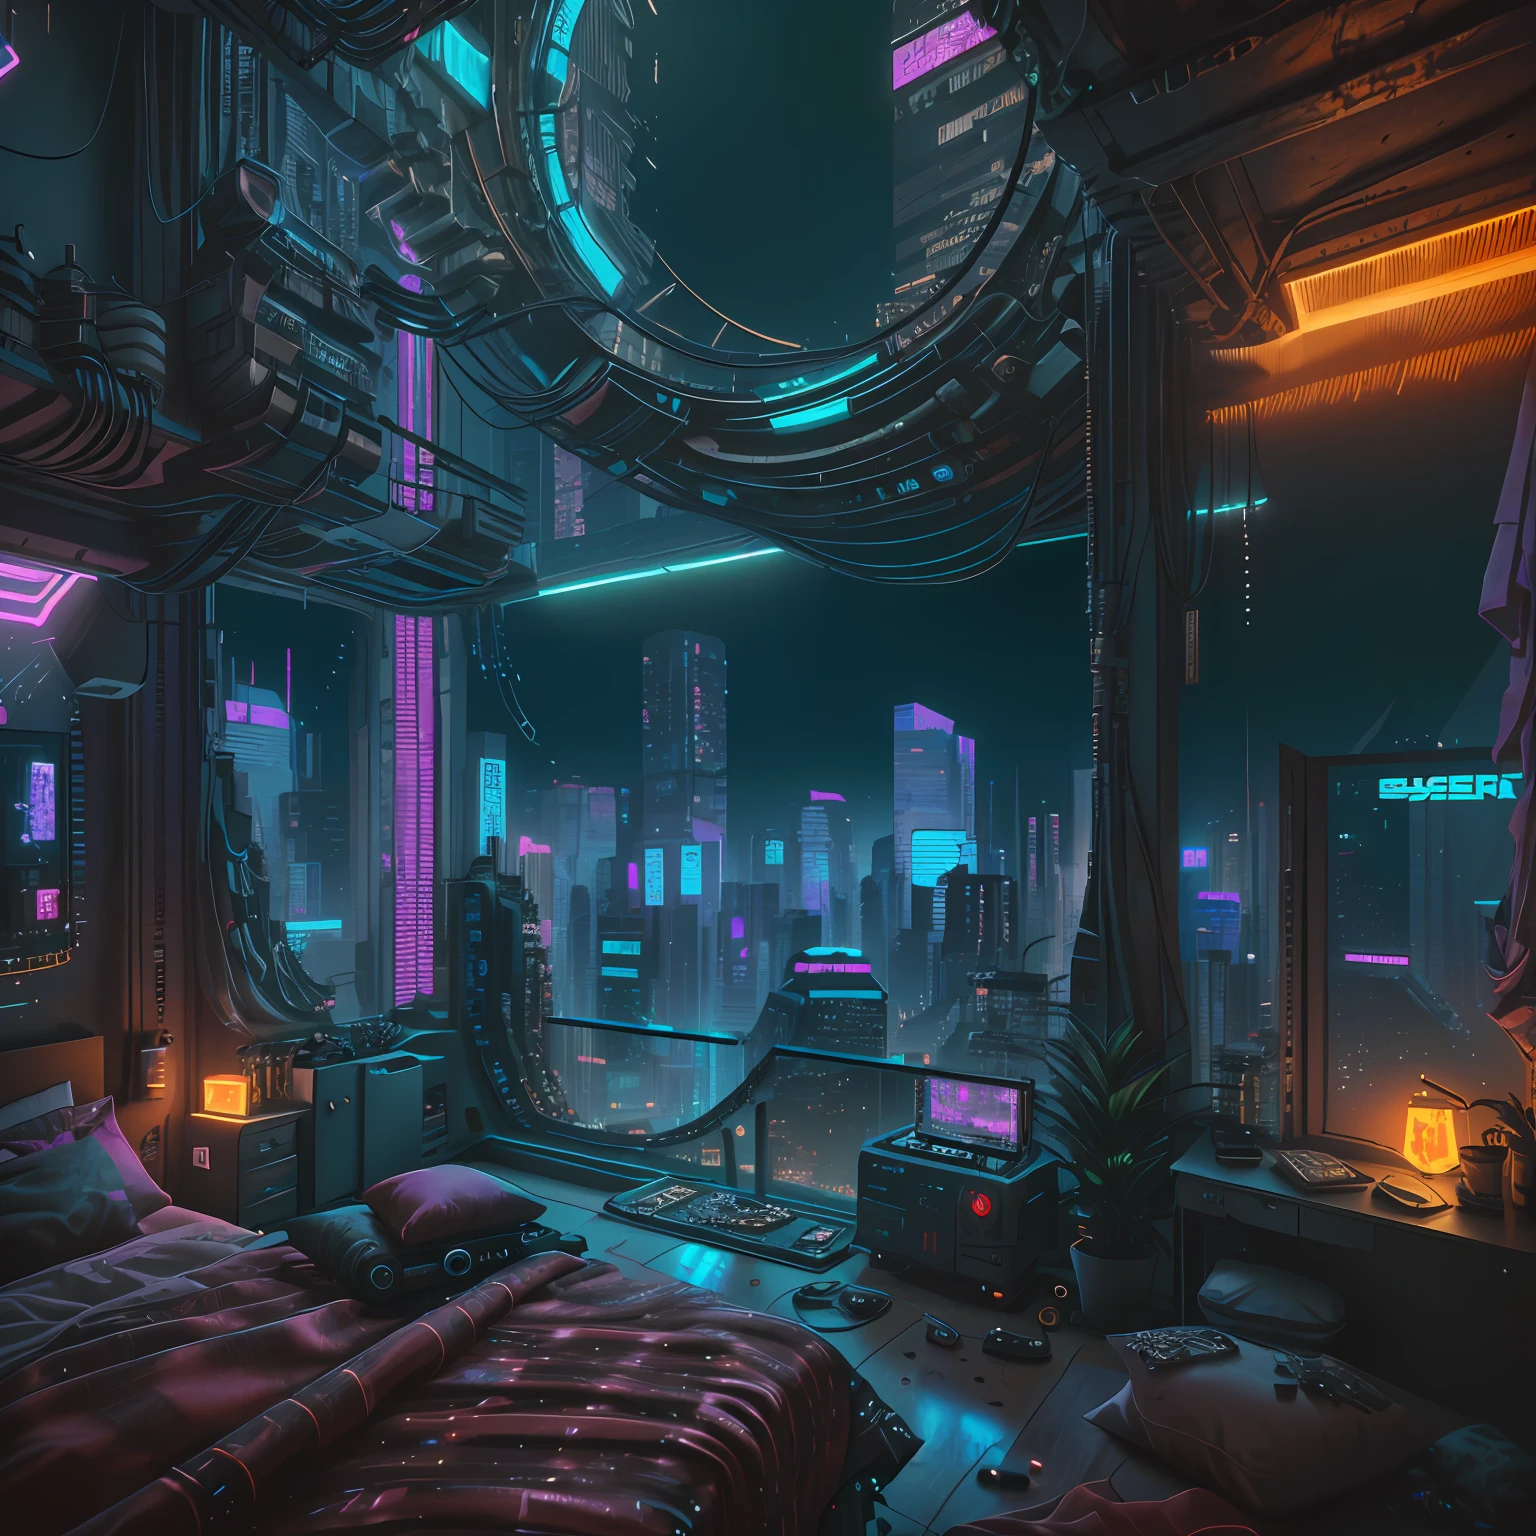 there is a bedroom with a bed and a window with a view of the city, cyberpunk bedroom at night, cyberpunk teenager bedroom, cyberpunk childrens bedroom, cyberpunk apartment, the cyberpunk apartment, cyberpunk art ultrarealistic 8k, cyberpunk dreamscape, 3 d render beeple, hyper-realistic cyberpunk style, in a cyberpunk themed room, cyberpunk interior, cyberpunk setting